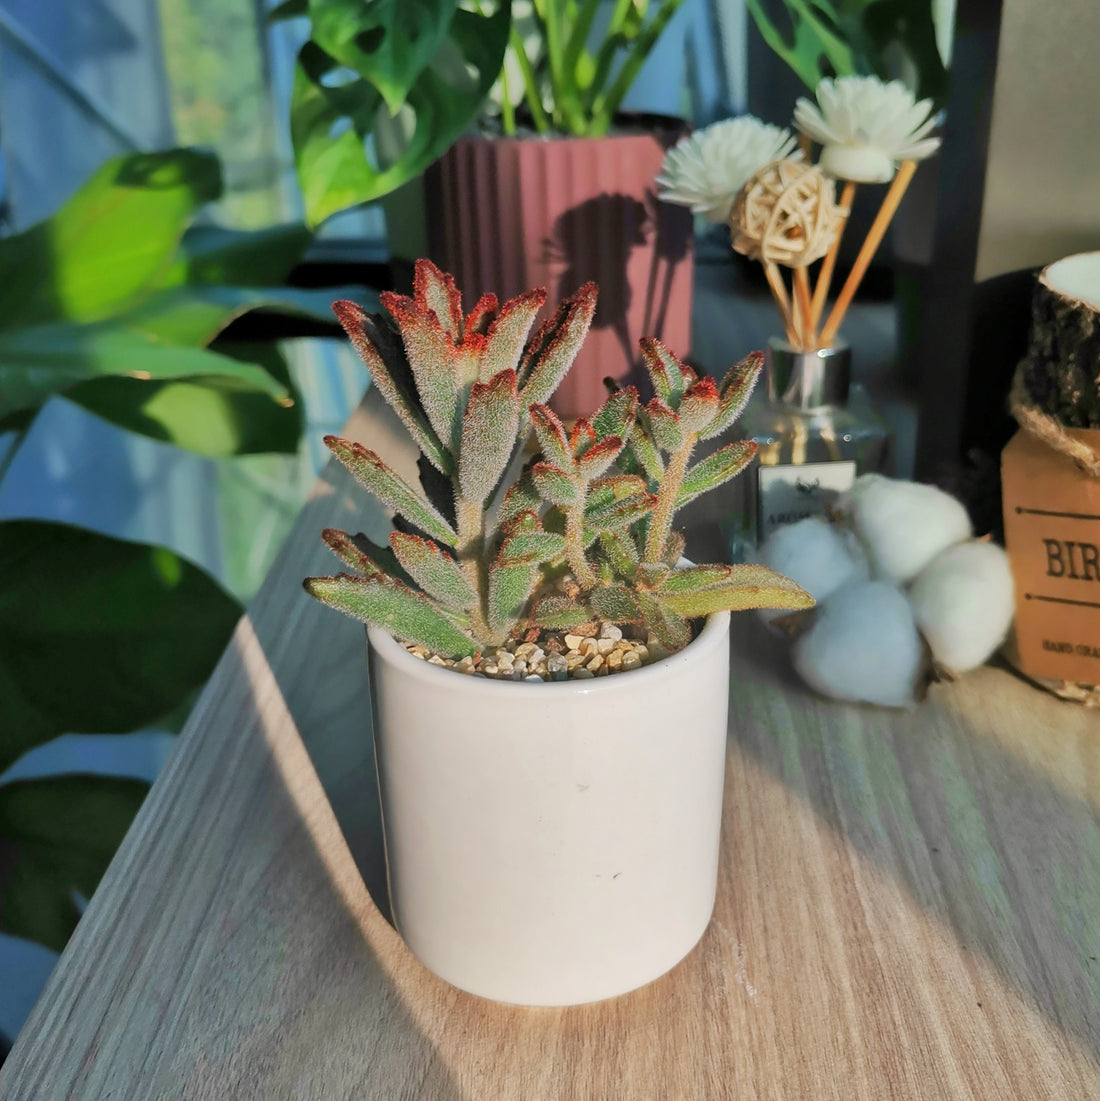 Can succulents be placed under fluorescent light?